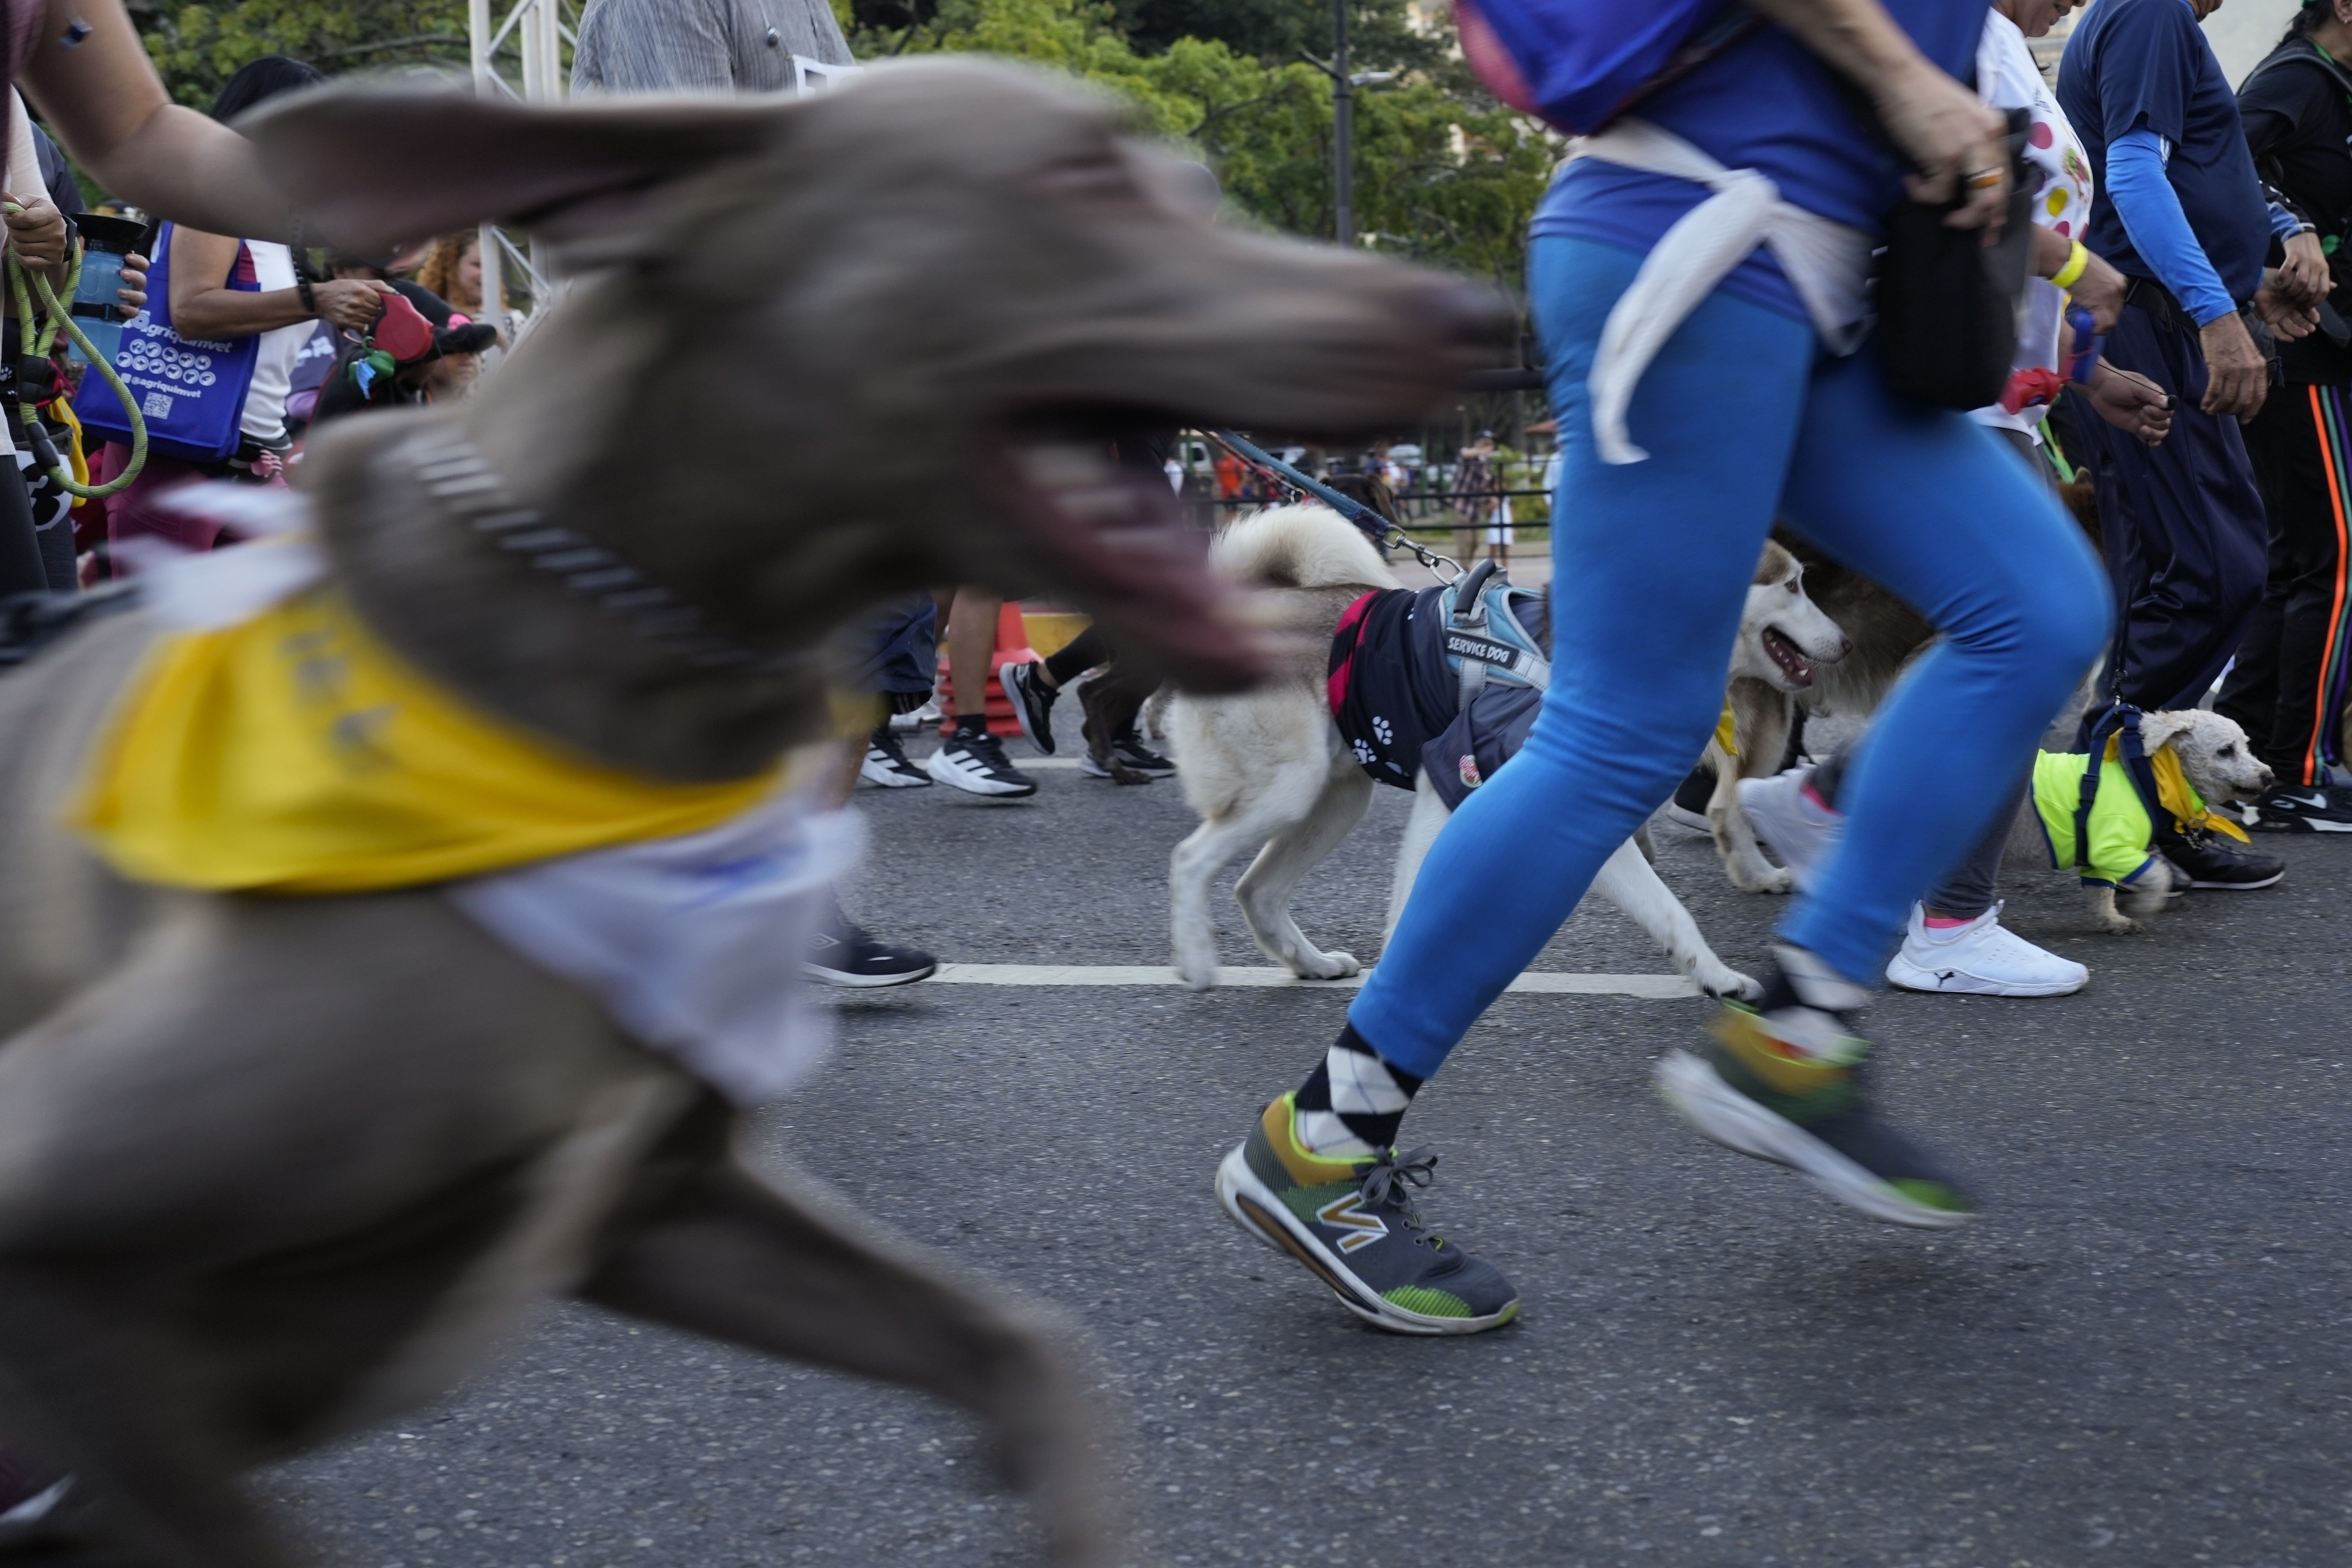 Dogs and their owners participate in the 4 km race "A race with a cause" organized by a shelter to raise funds for rescued dogs, in Caracas, Venezuela, on April 30, 2023. (AP Photo/Ariana Cubillos)